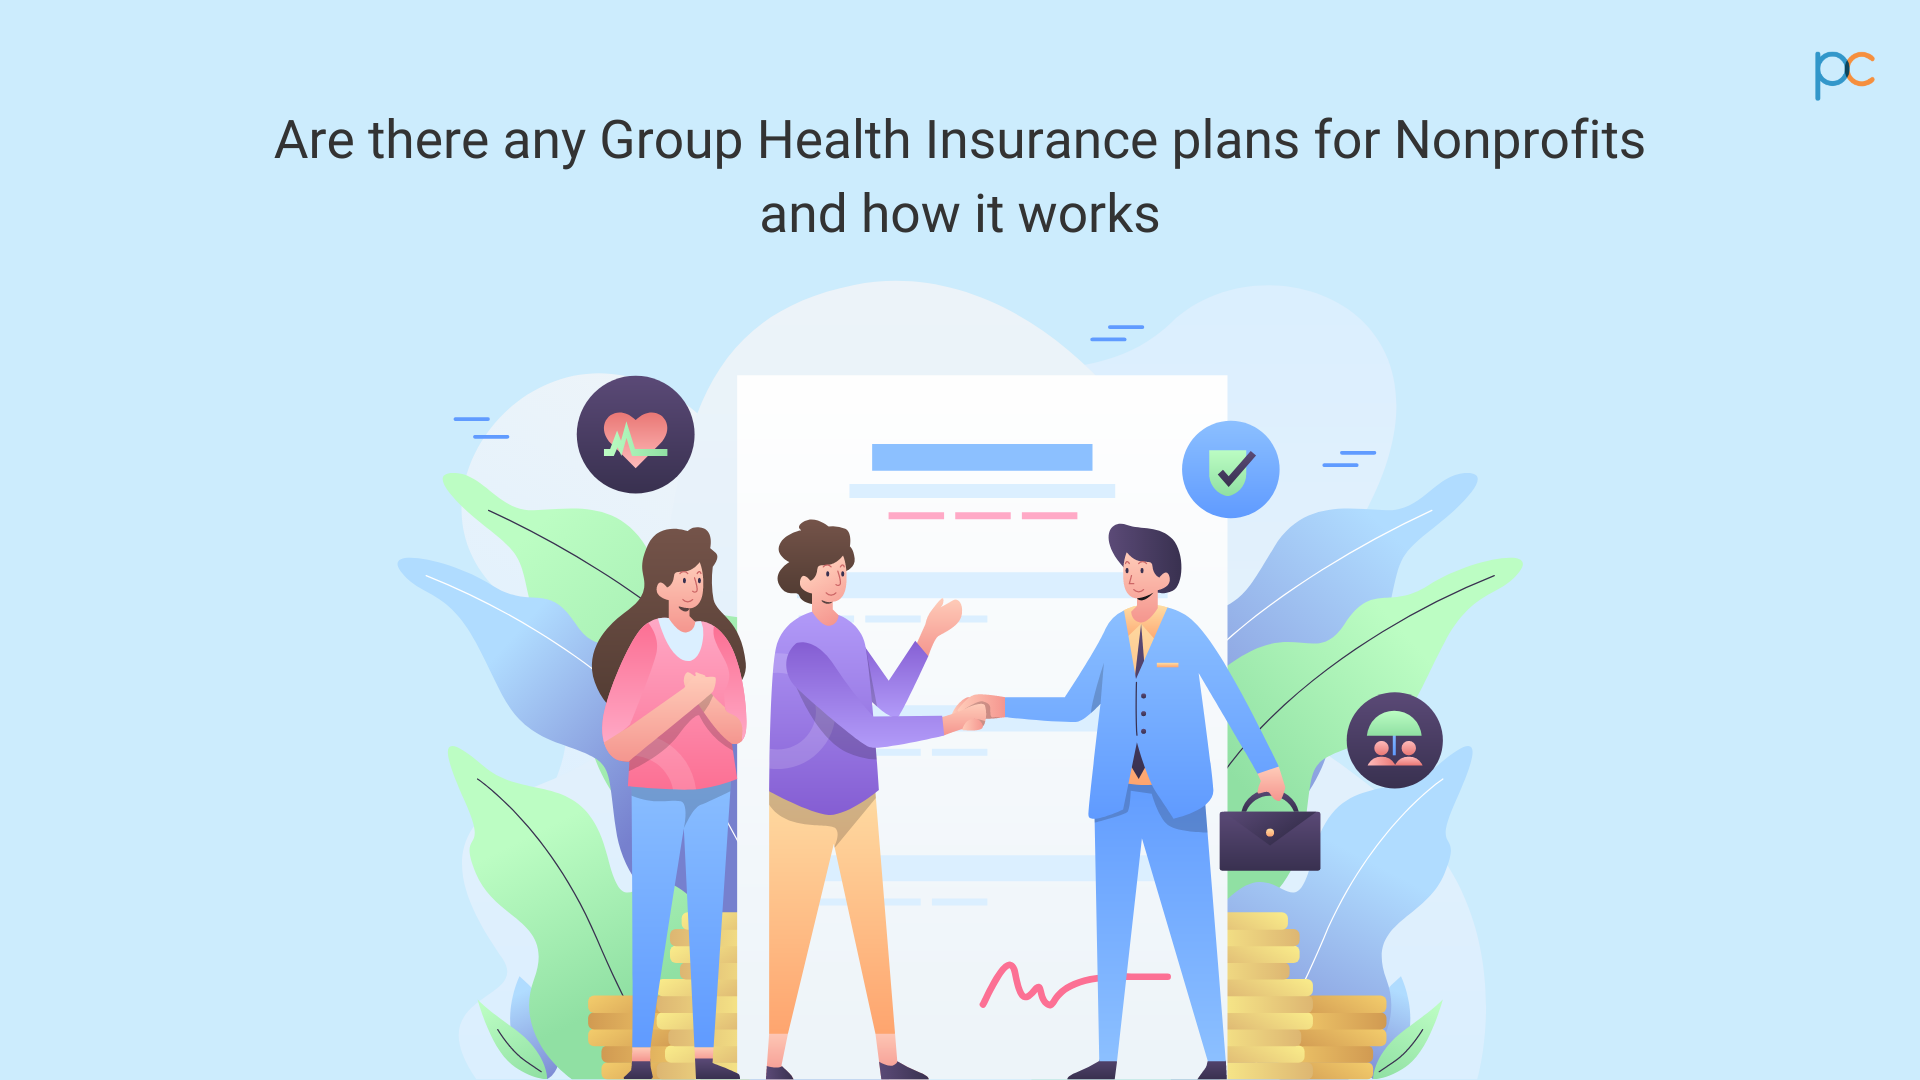 Are there any Group Health Insurance plans for Nonprofits and how it works